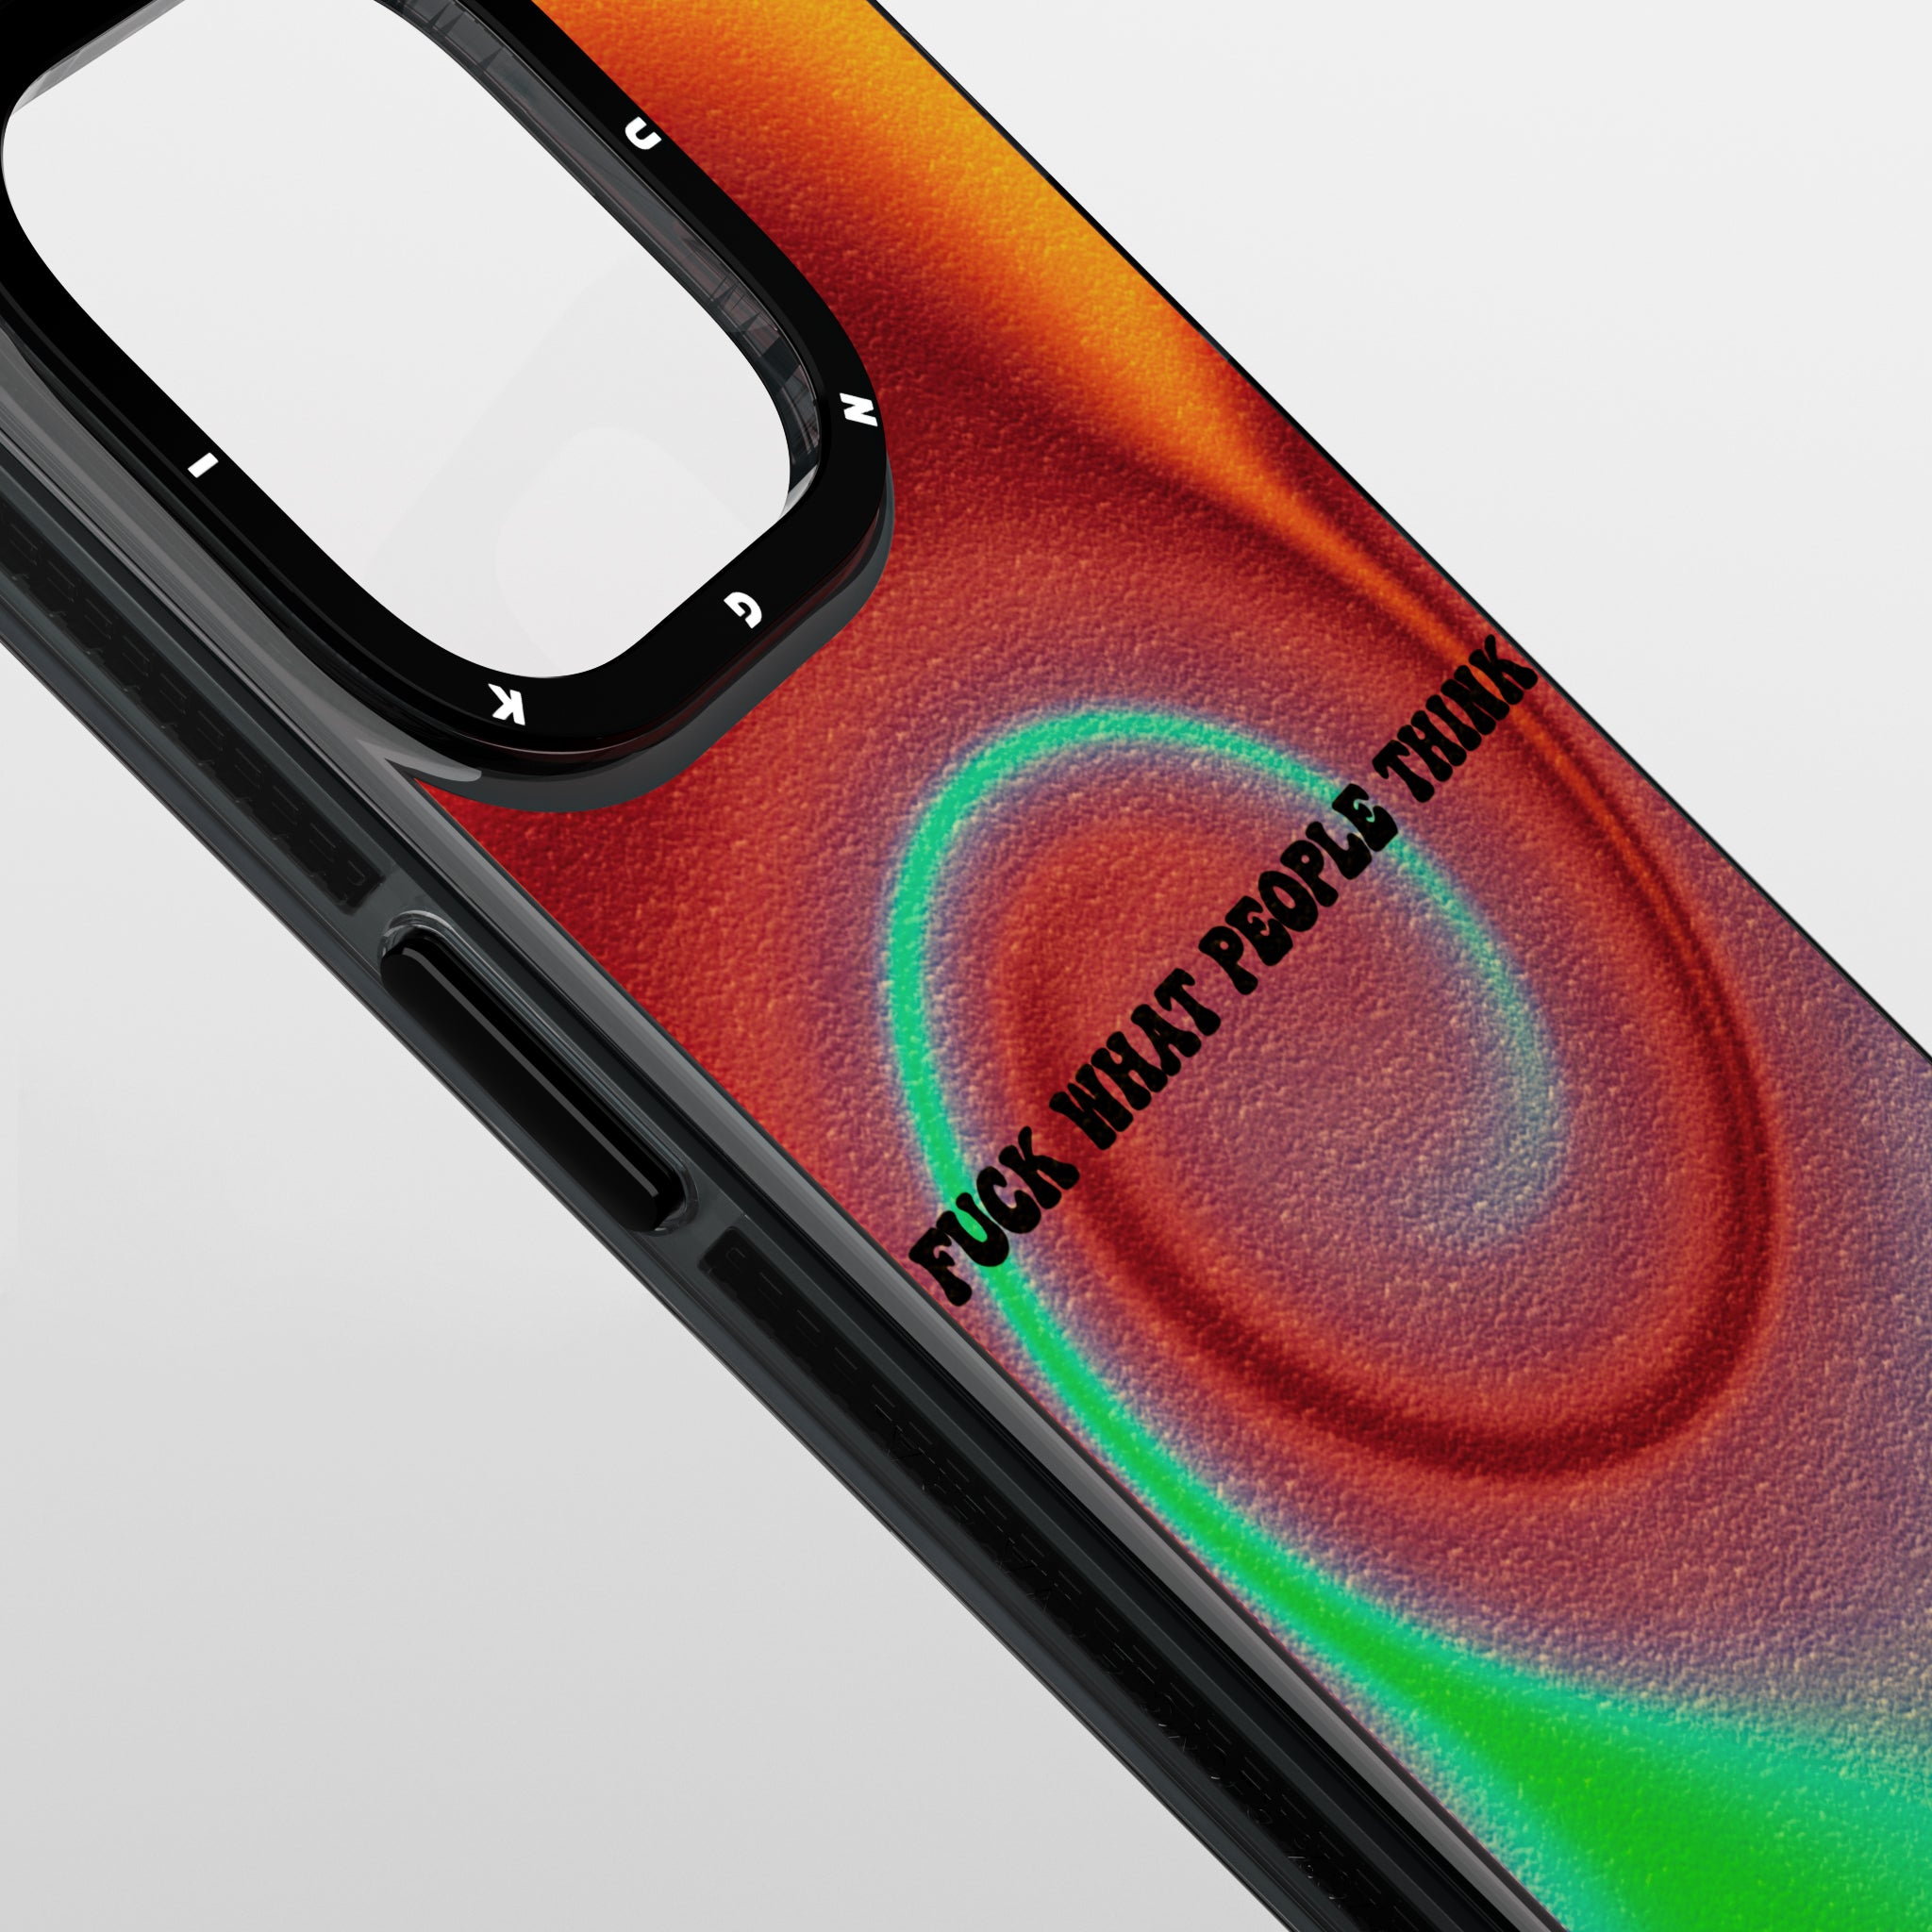 YOUNGKIT X Creationtrip iPhone 13/14 Case